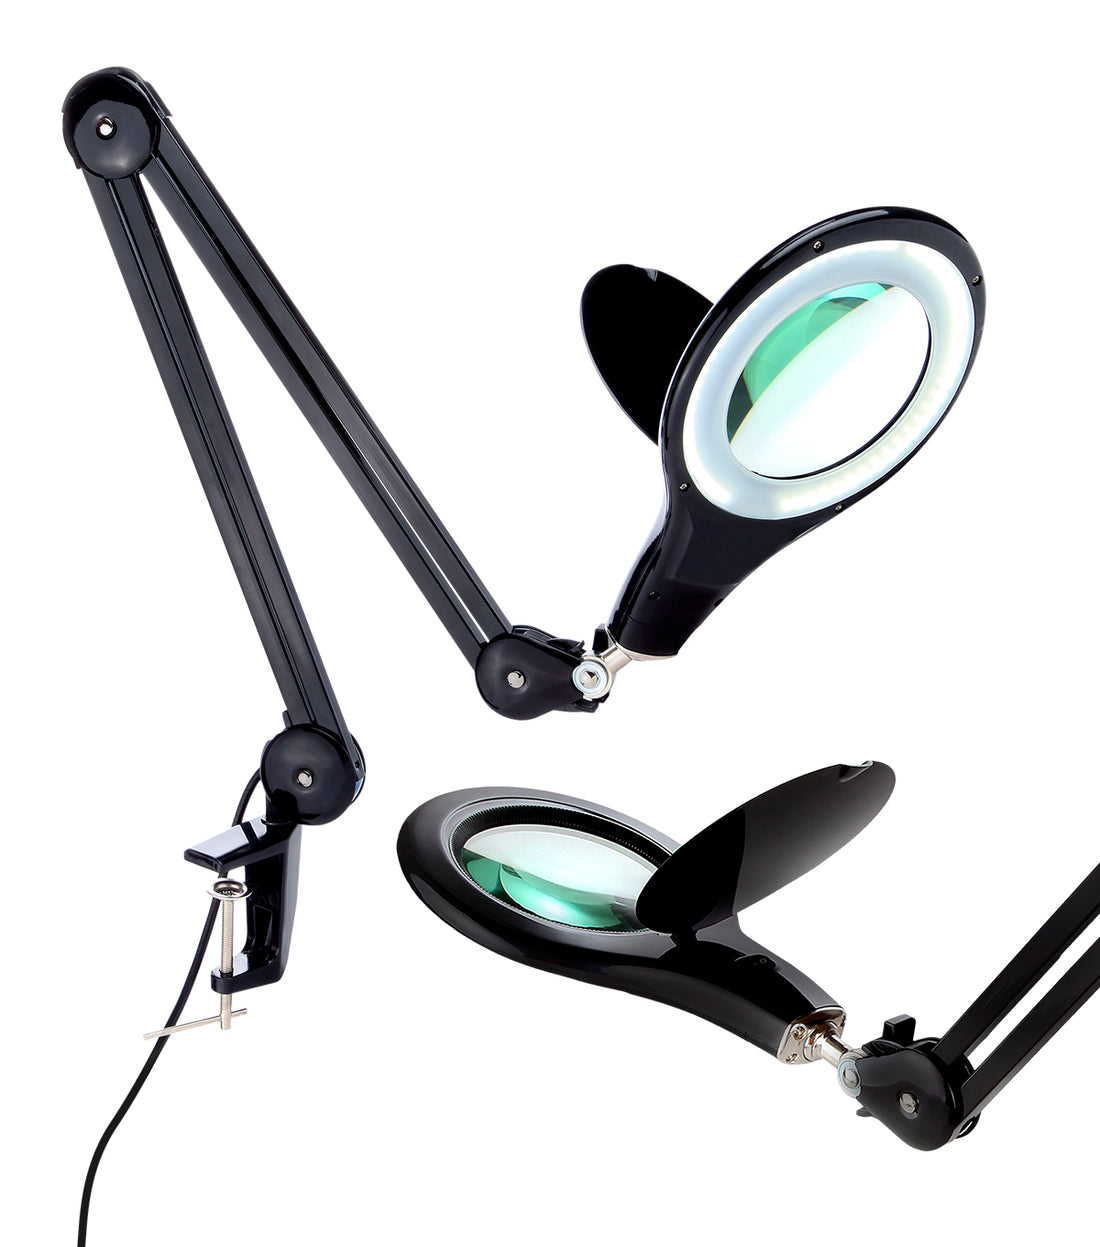 Glasses With Magnifying Lens Head With 23x Zoom & LED Lighting